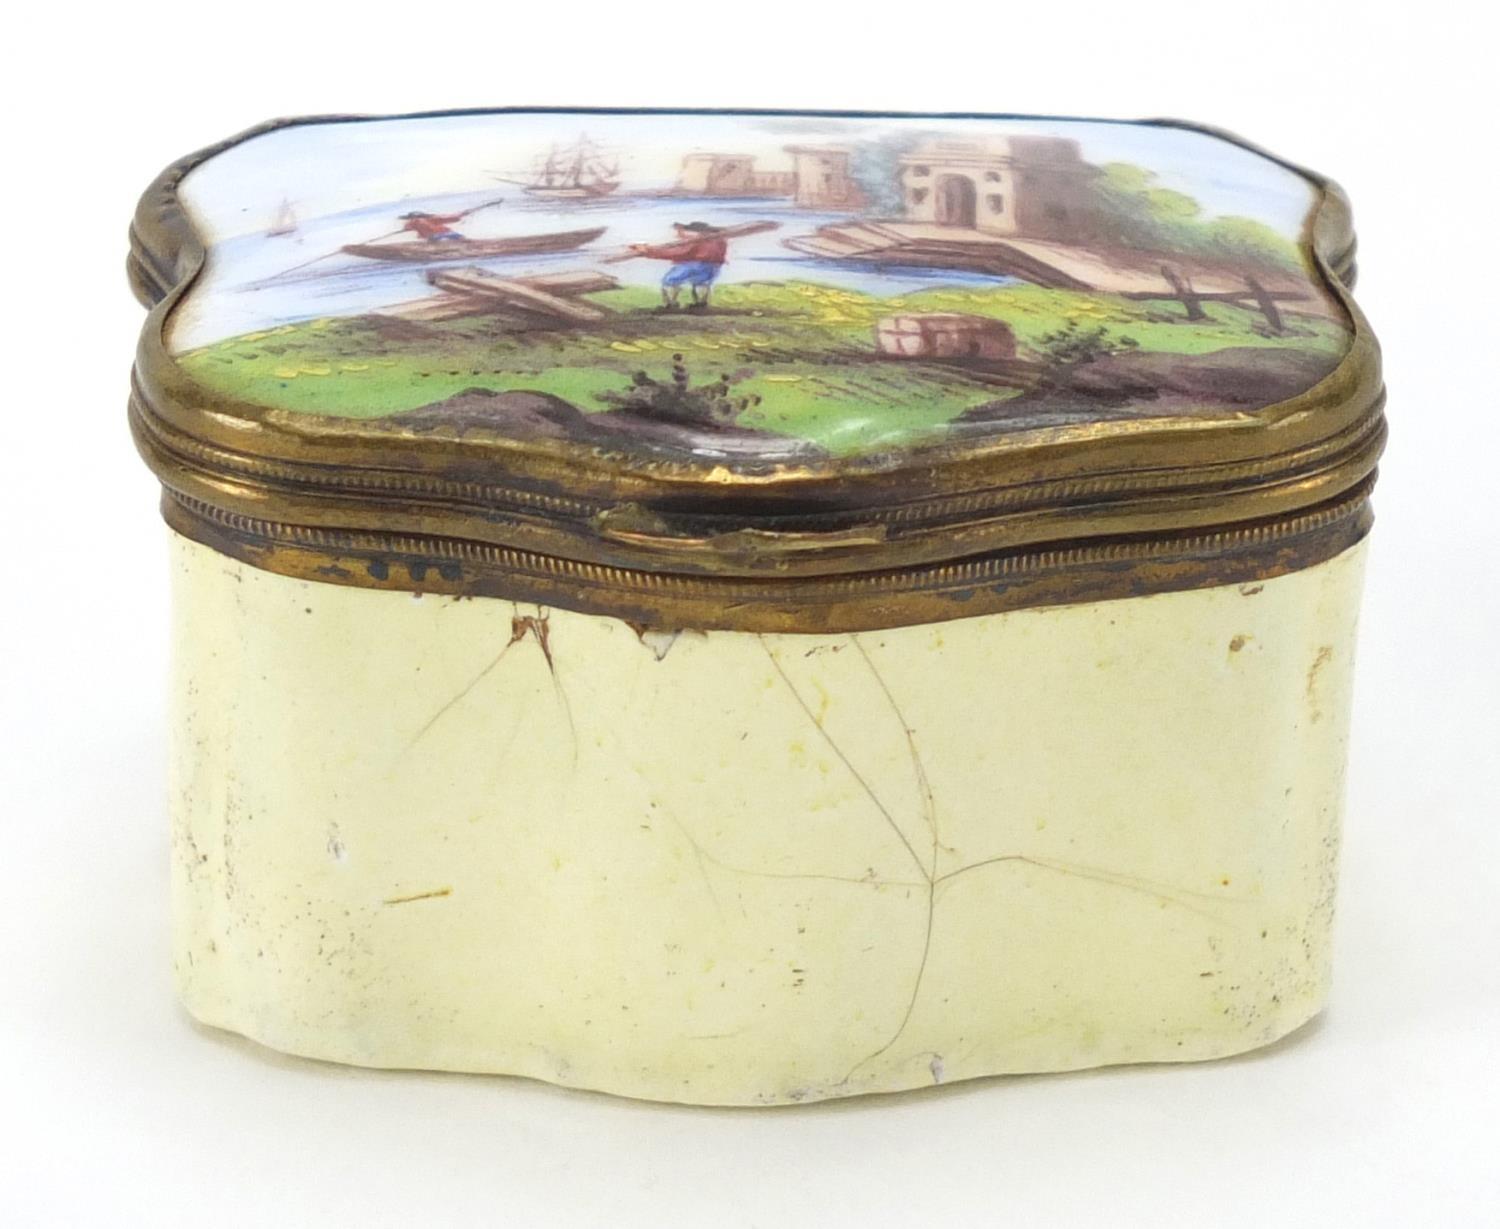 Antique shaped enamel patch box hand painted with continental figures and boats, 2.9cm H x 5cm W x - Image 3 of 6